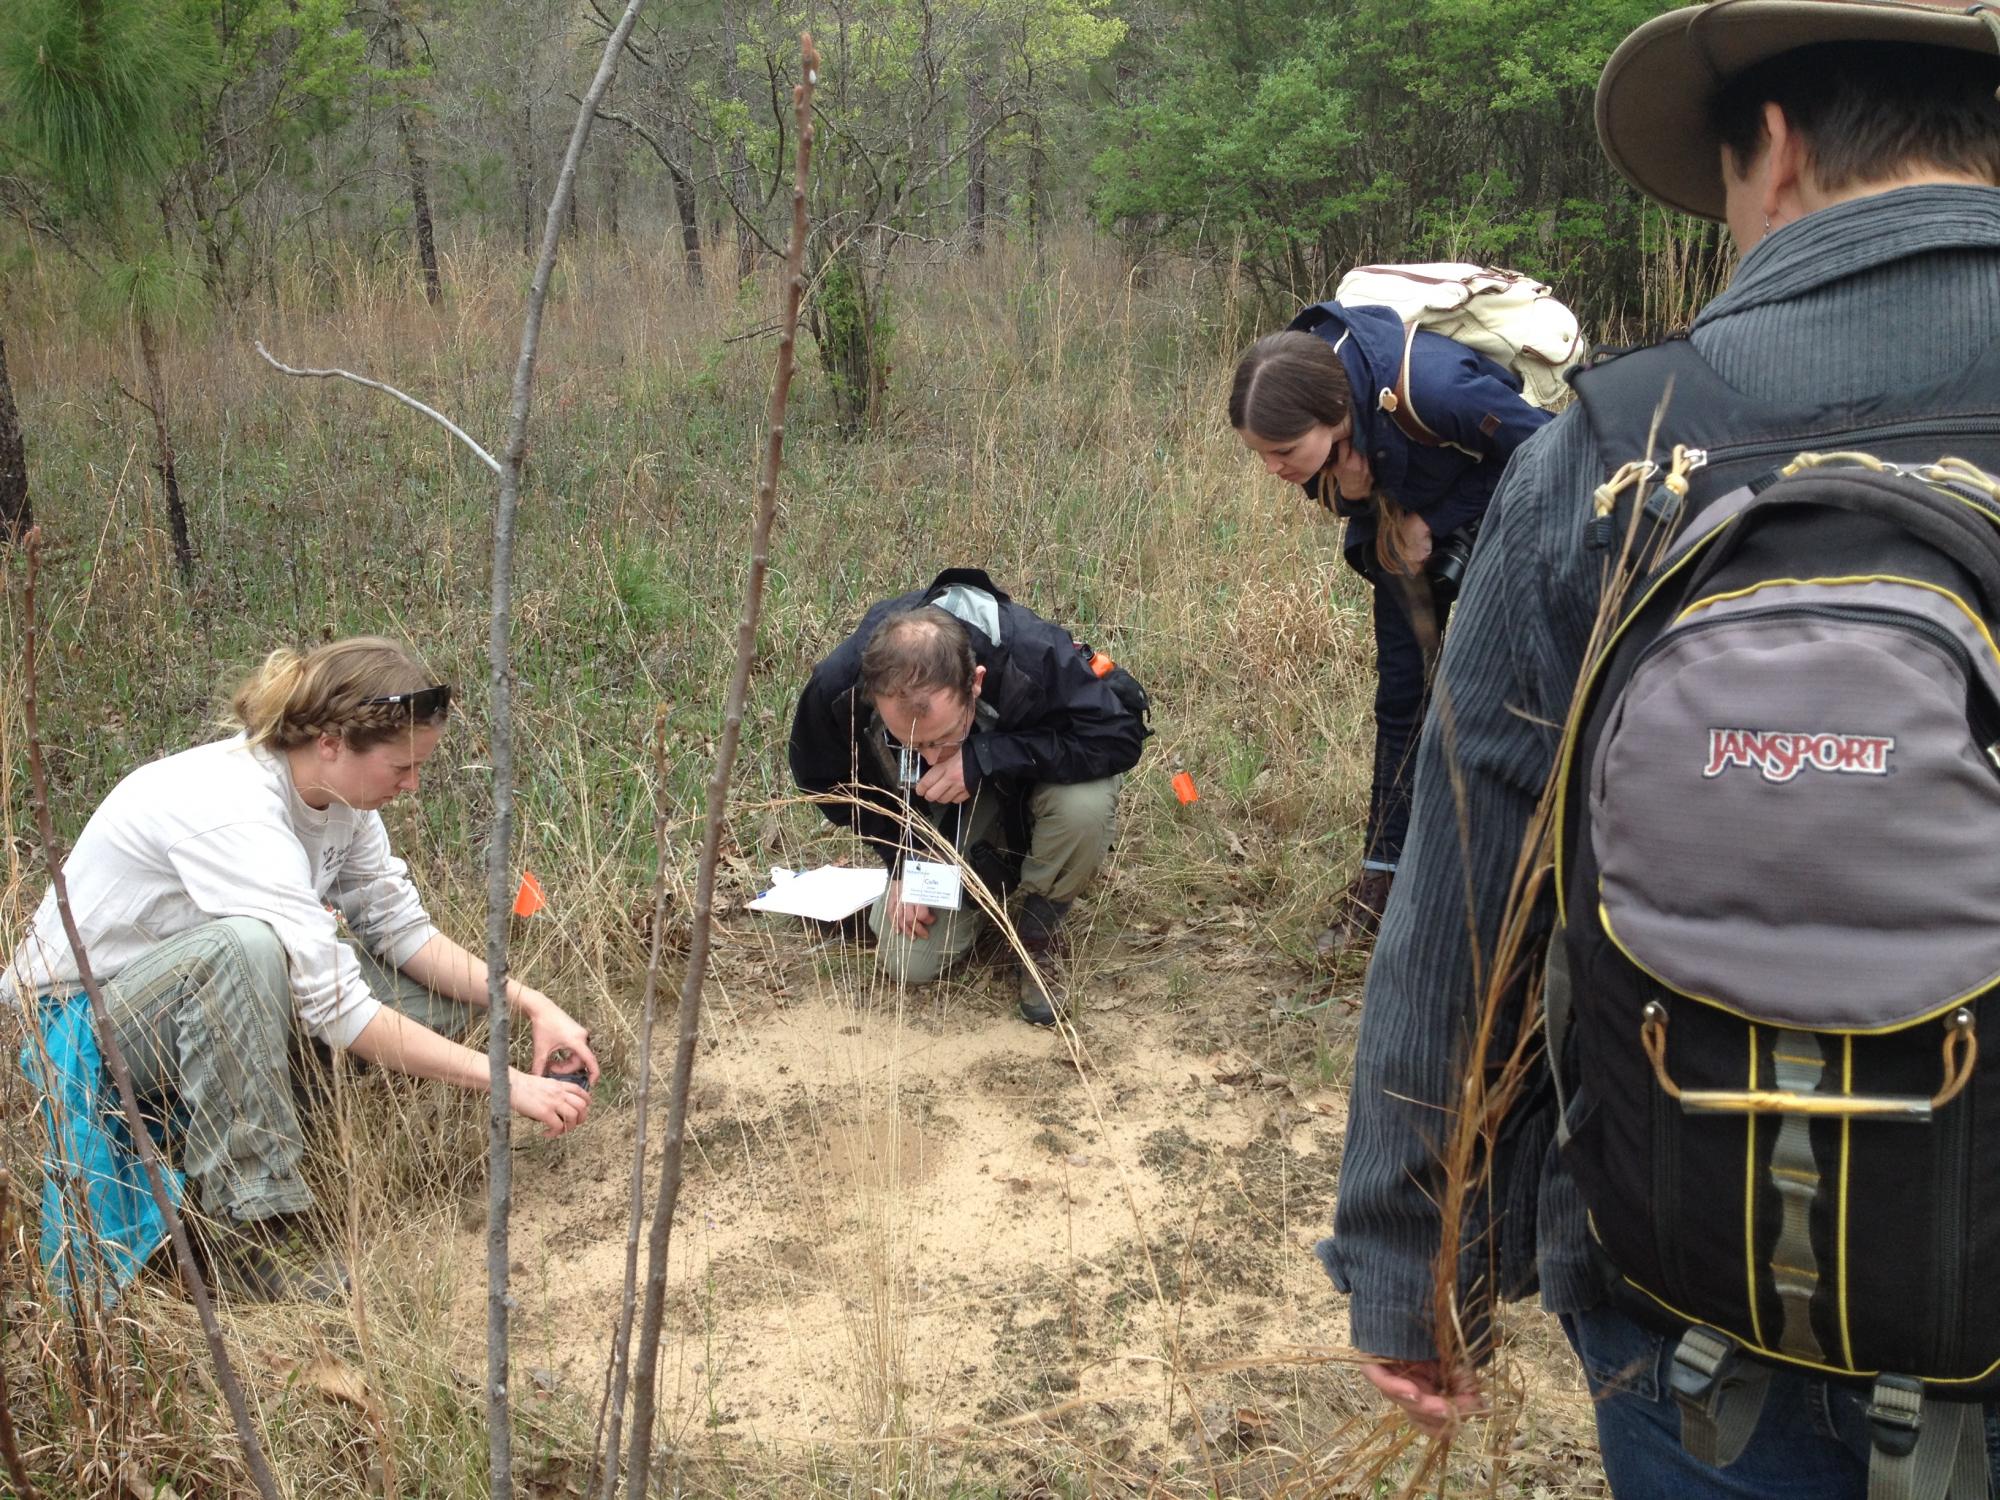 CMT participants examine the burrow of a gopher tortoise discovered during the 2014 training session near New Orleans.